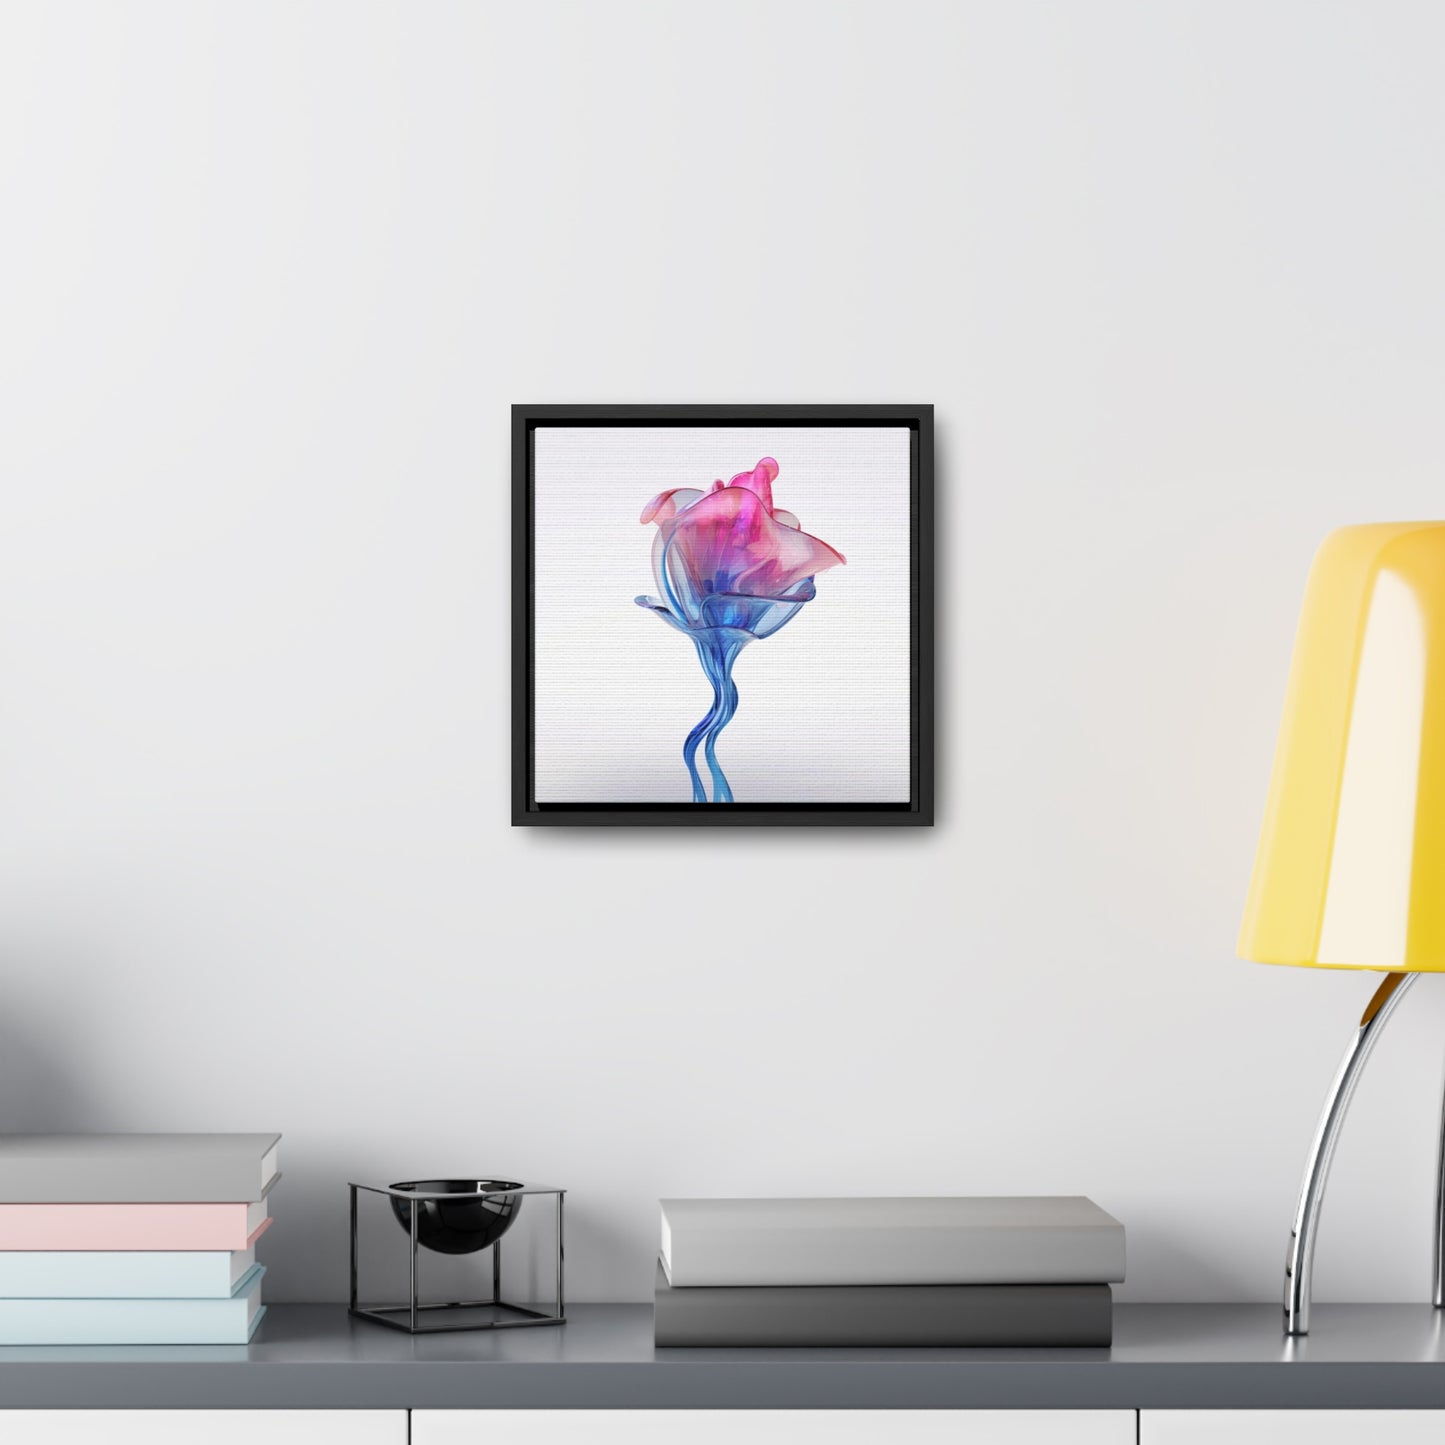 Gallery Canvas Wraps, Square Frame Pink & Blue Tulip Rose 4